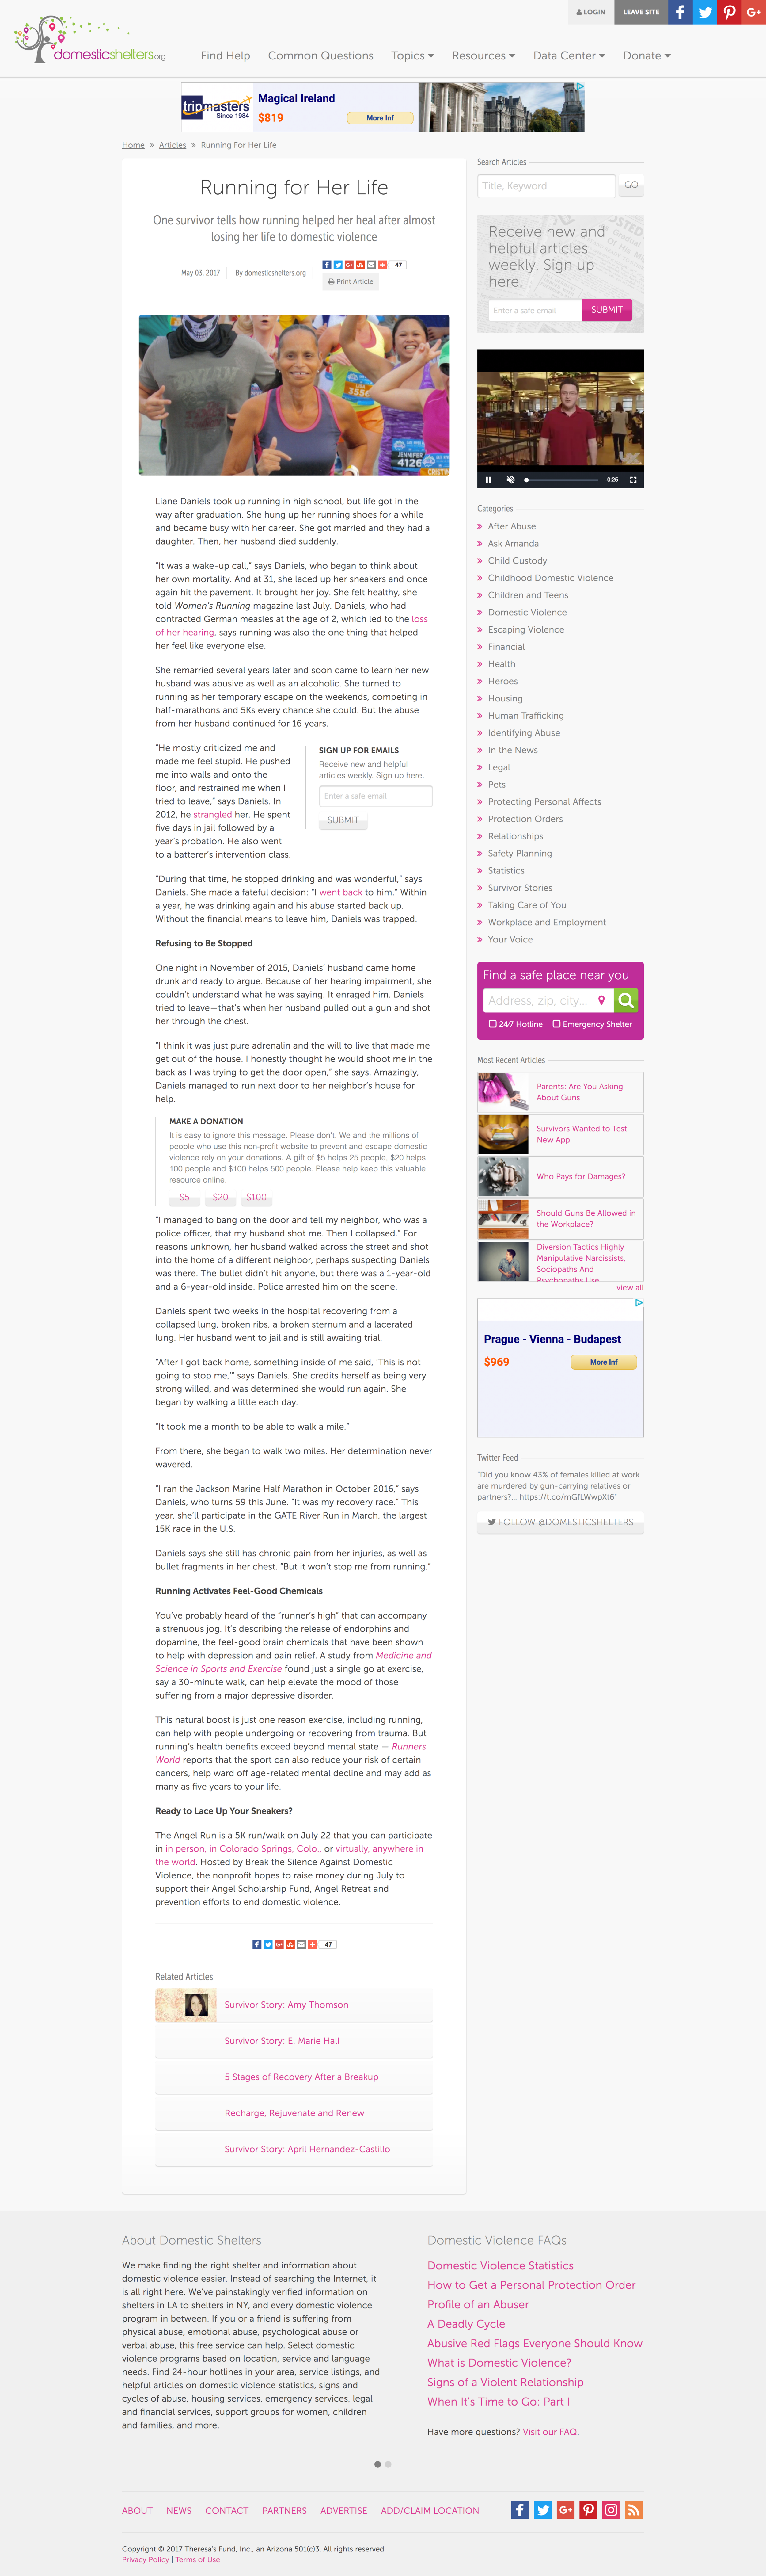 screencapture-domesticshelters-org-domestic-violence-articles-information-running-for-her-life-1498599317269.png